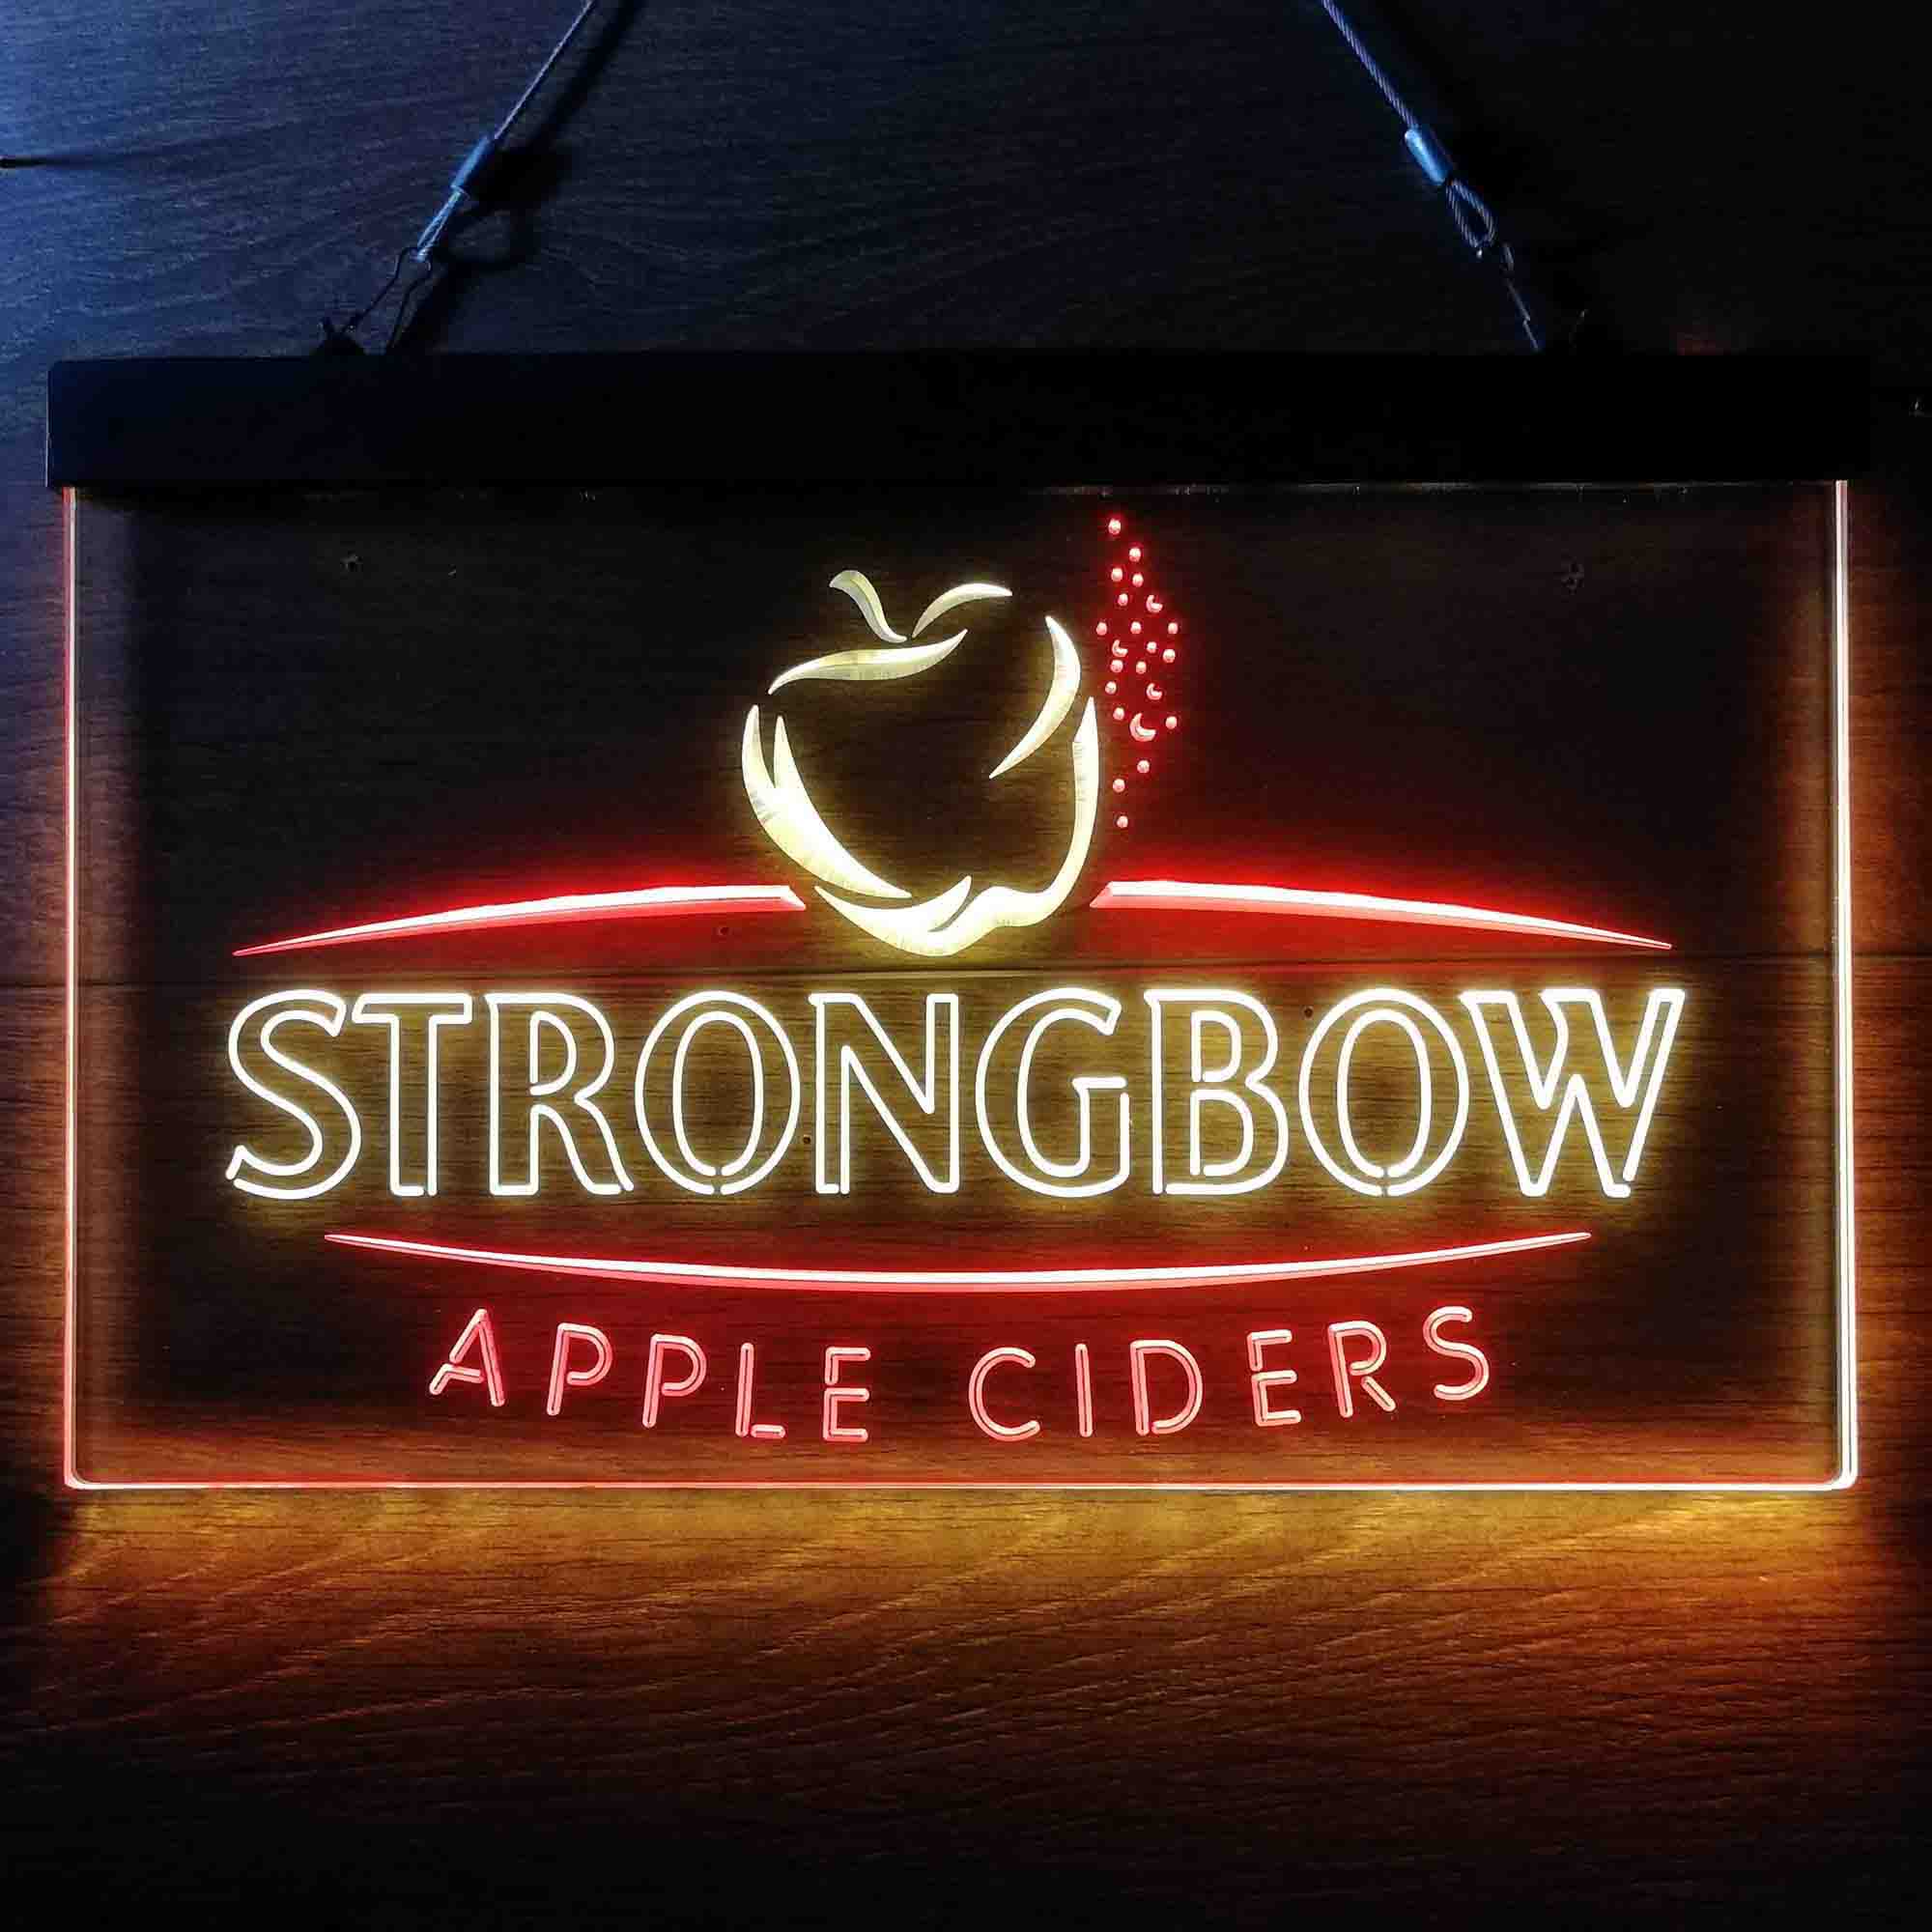 Strongbow Apple Ciders Neon LED Sign